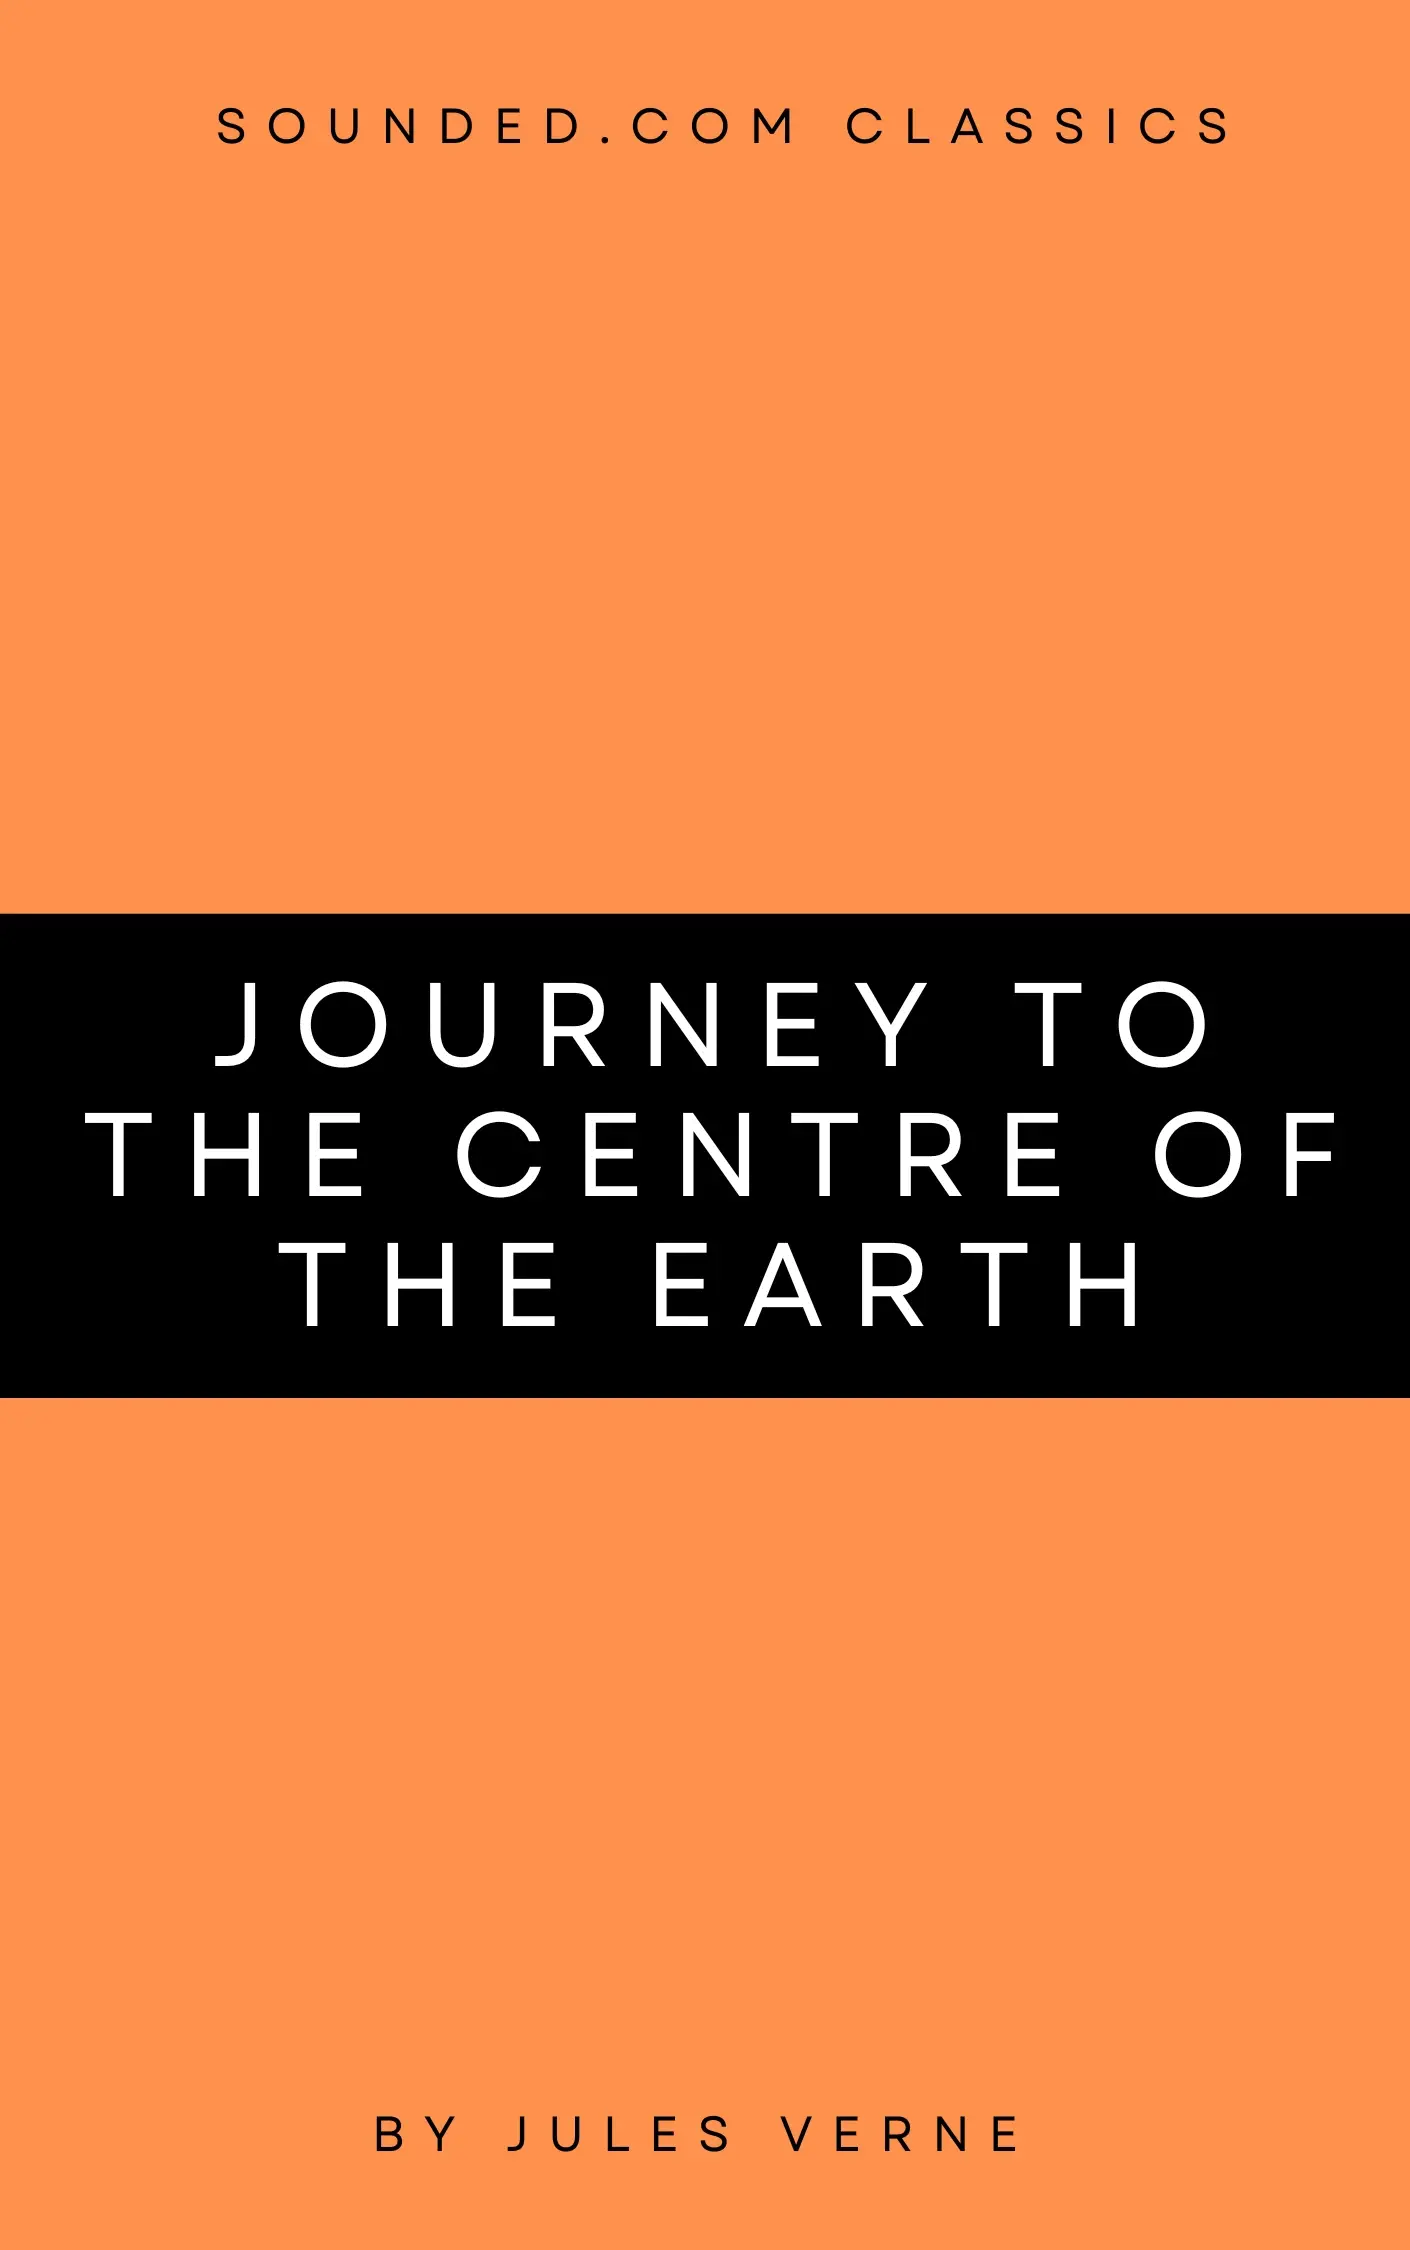 A Journey to the Centre of the Earth by Jules Verne Audiobook